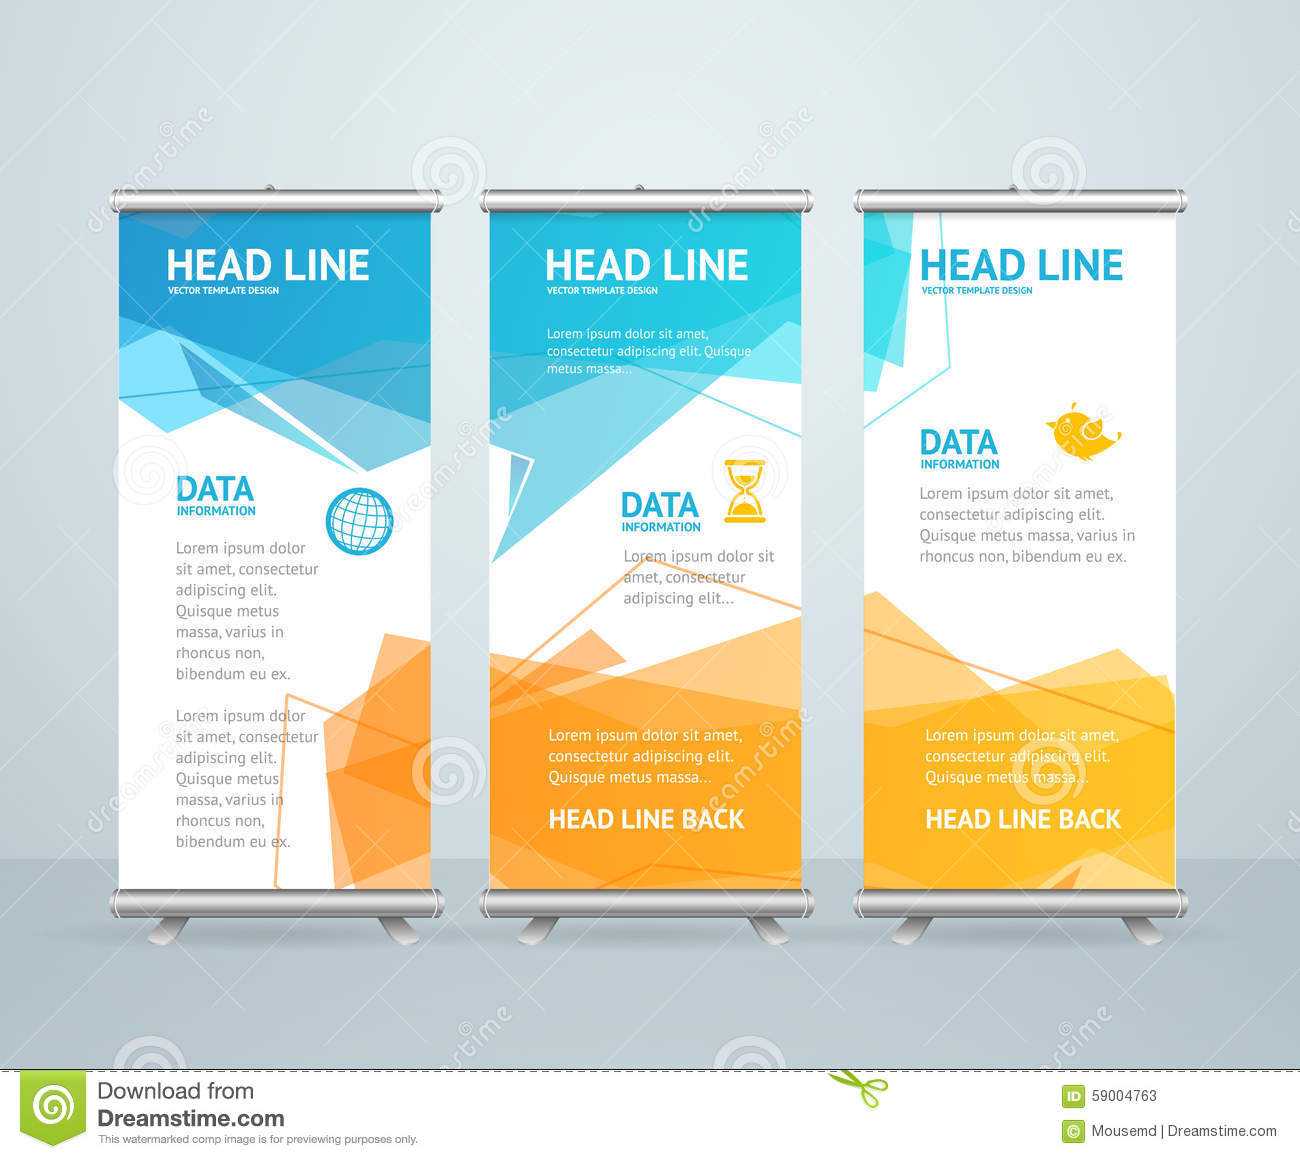 Roll Up Banner Stand Design. Vector Stock Vector For Pop Up Banner Design Template